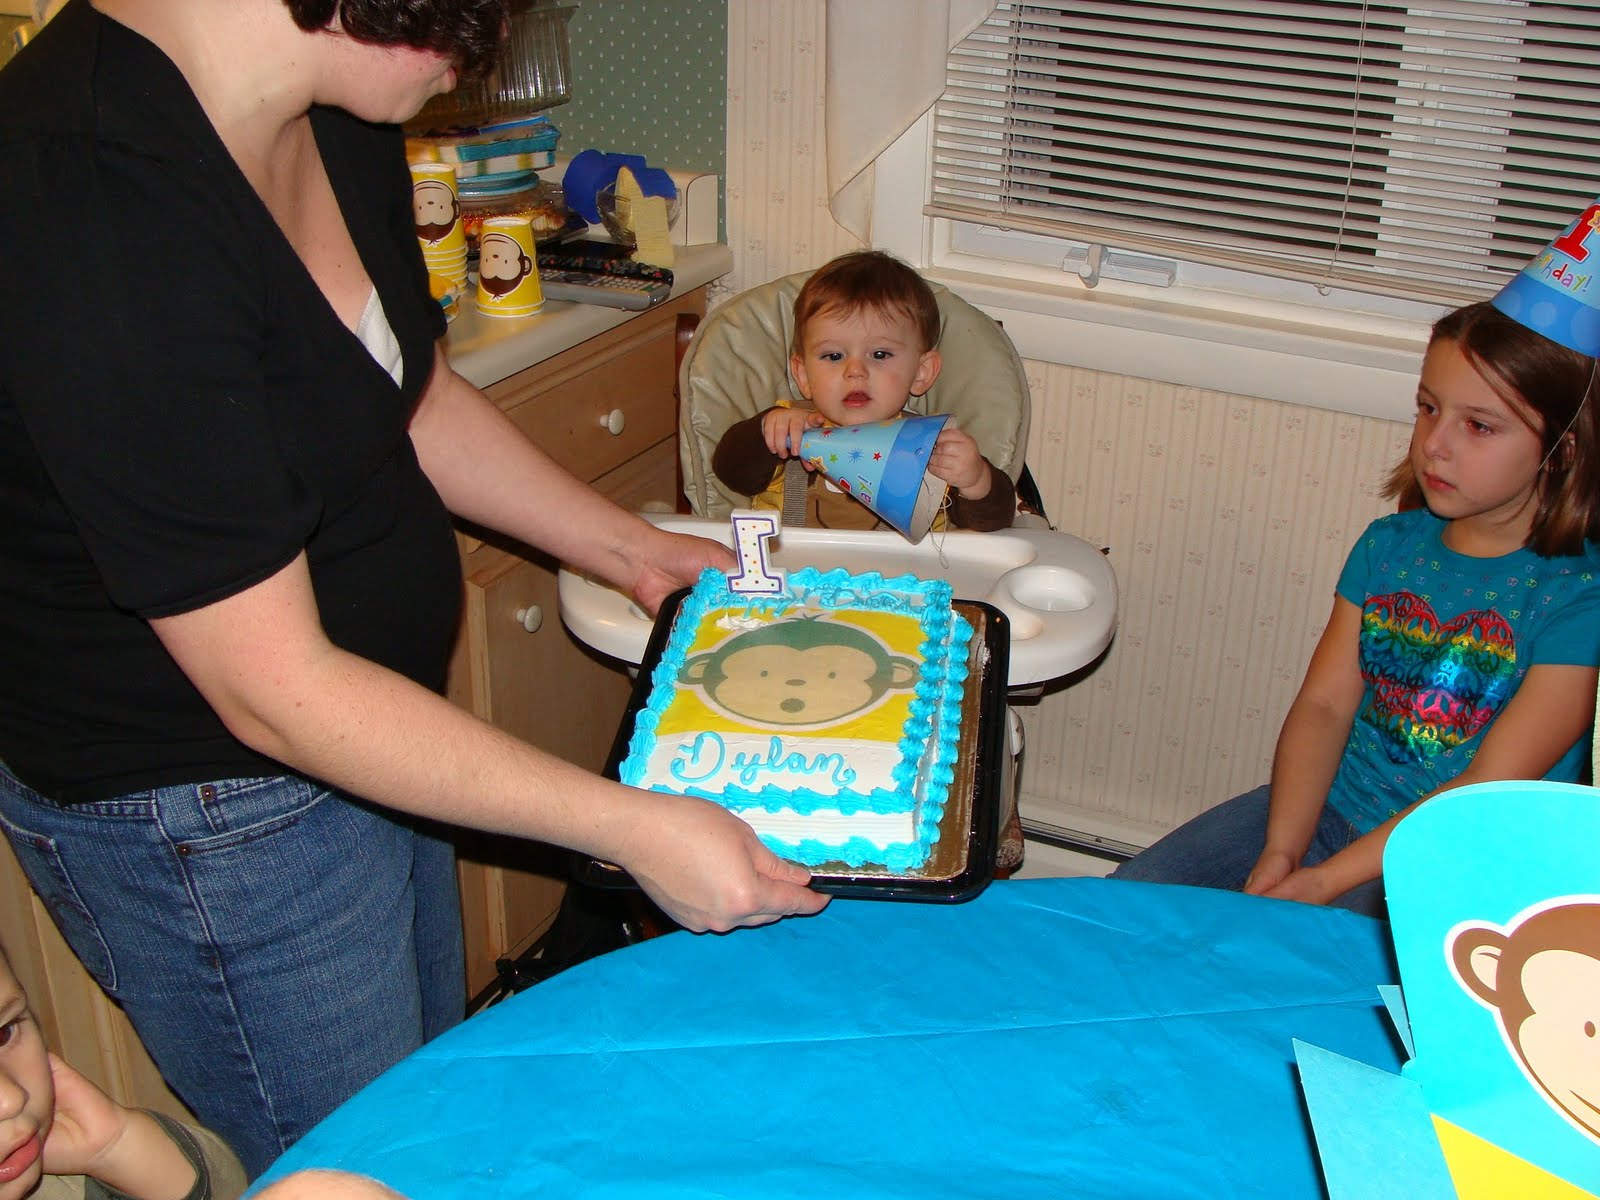 [Dylans+1st+bday+party+052.JPG]